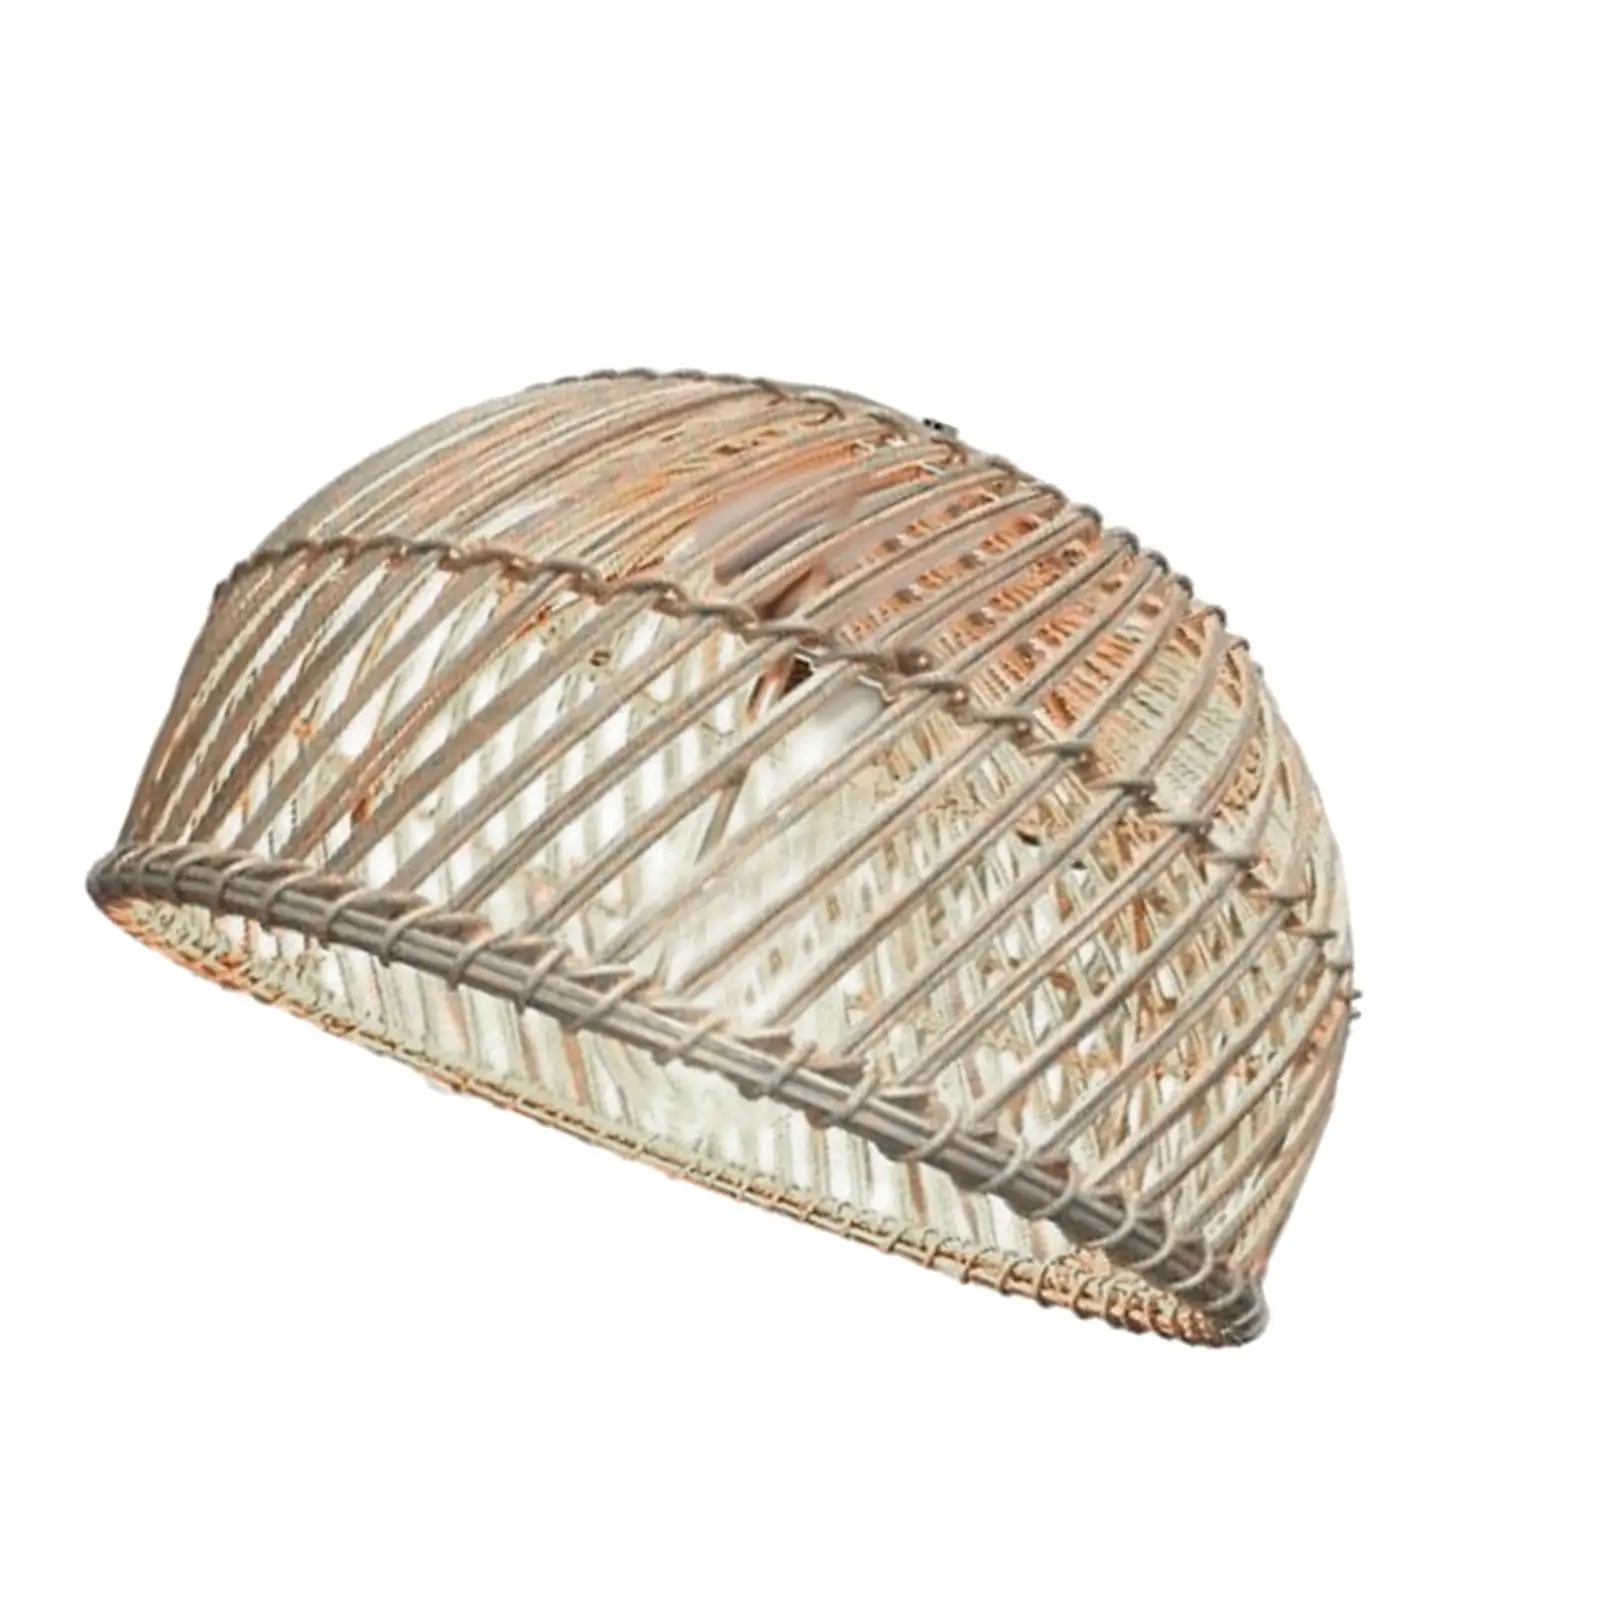 Rattan Woven Lampshade Ceiling Pendant Light Shade for Teahouse Dining Room